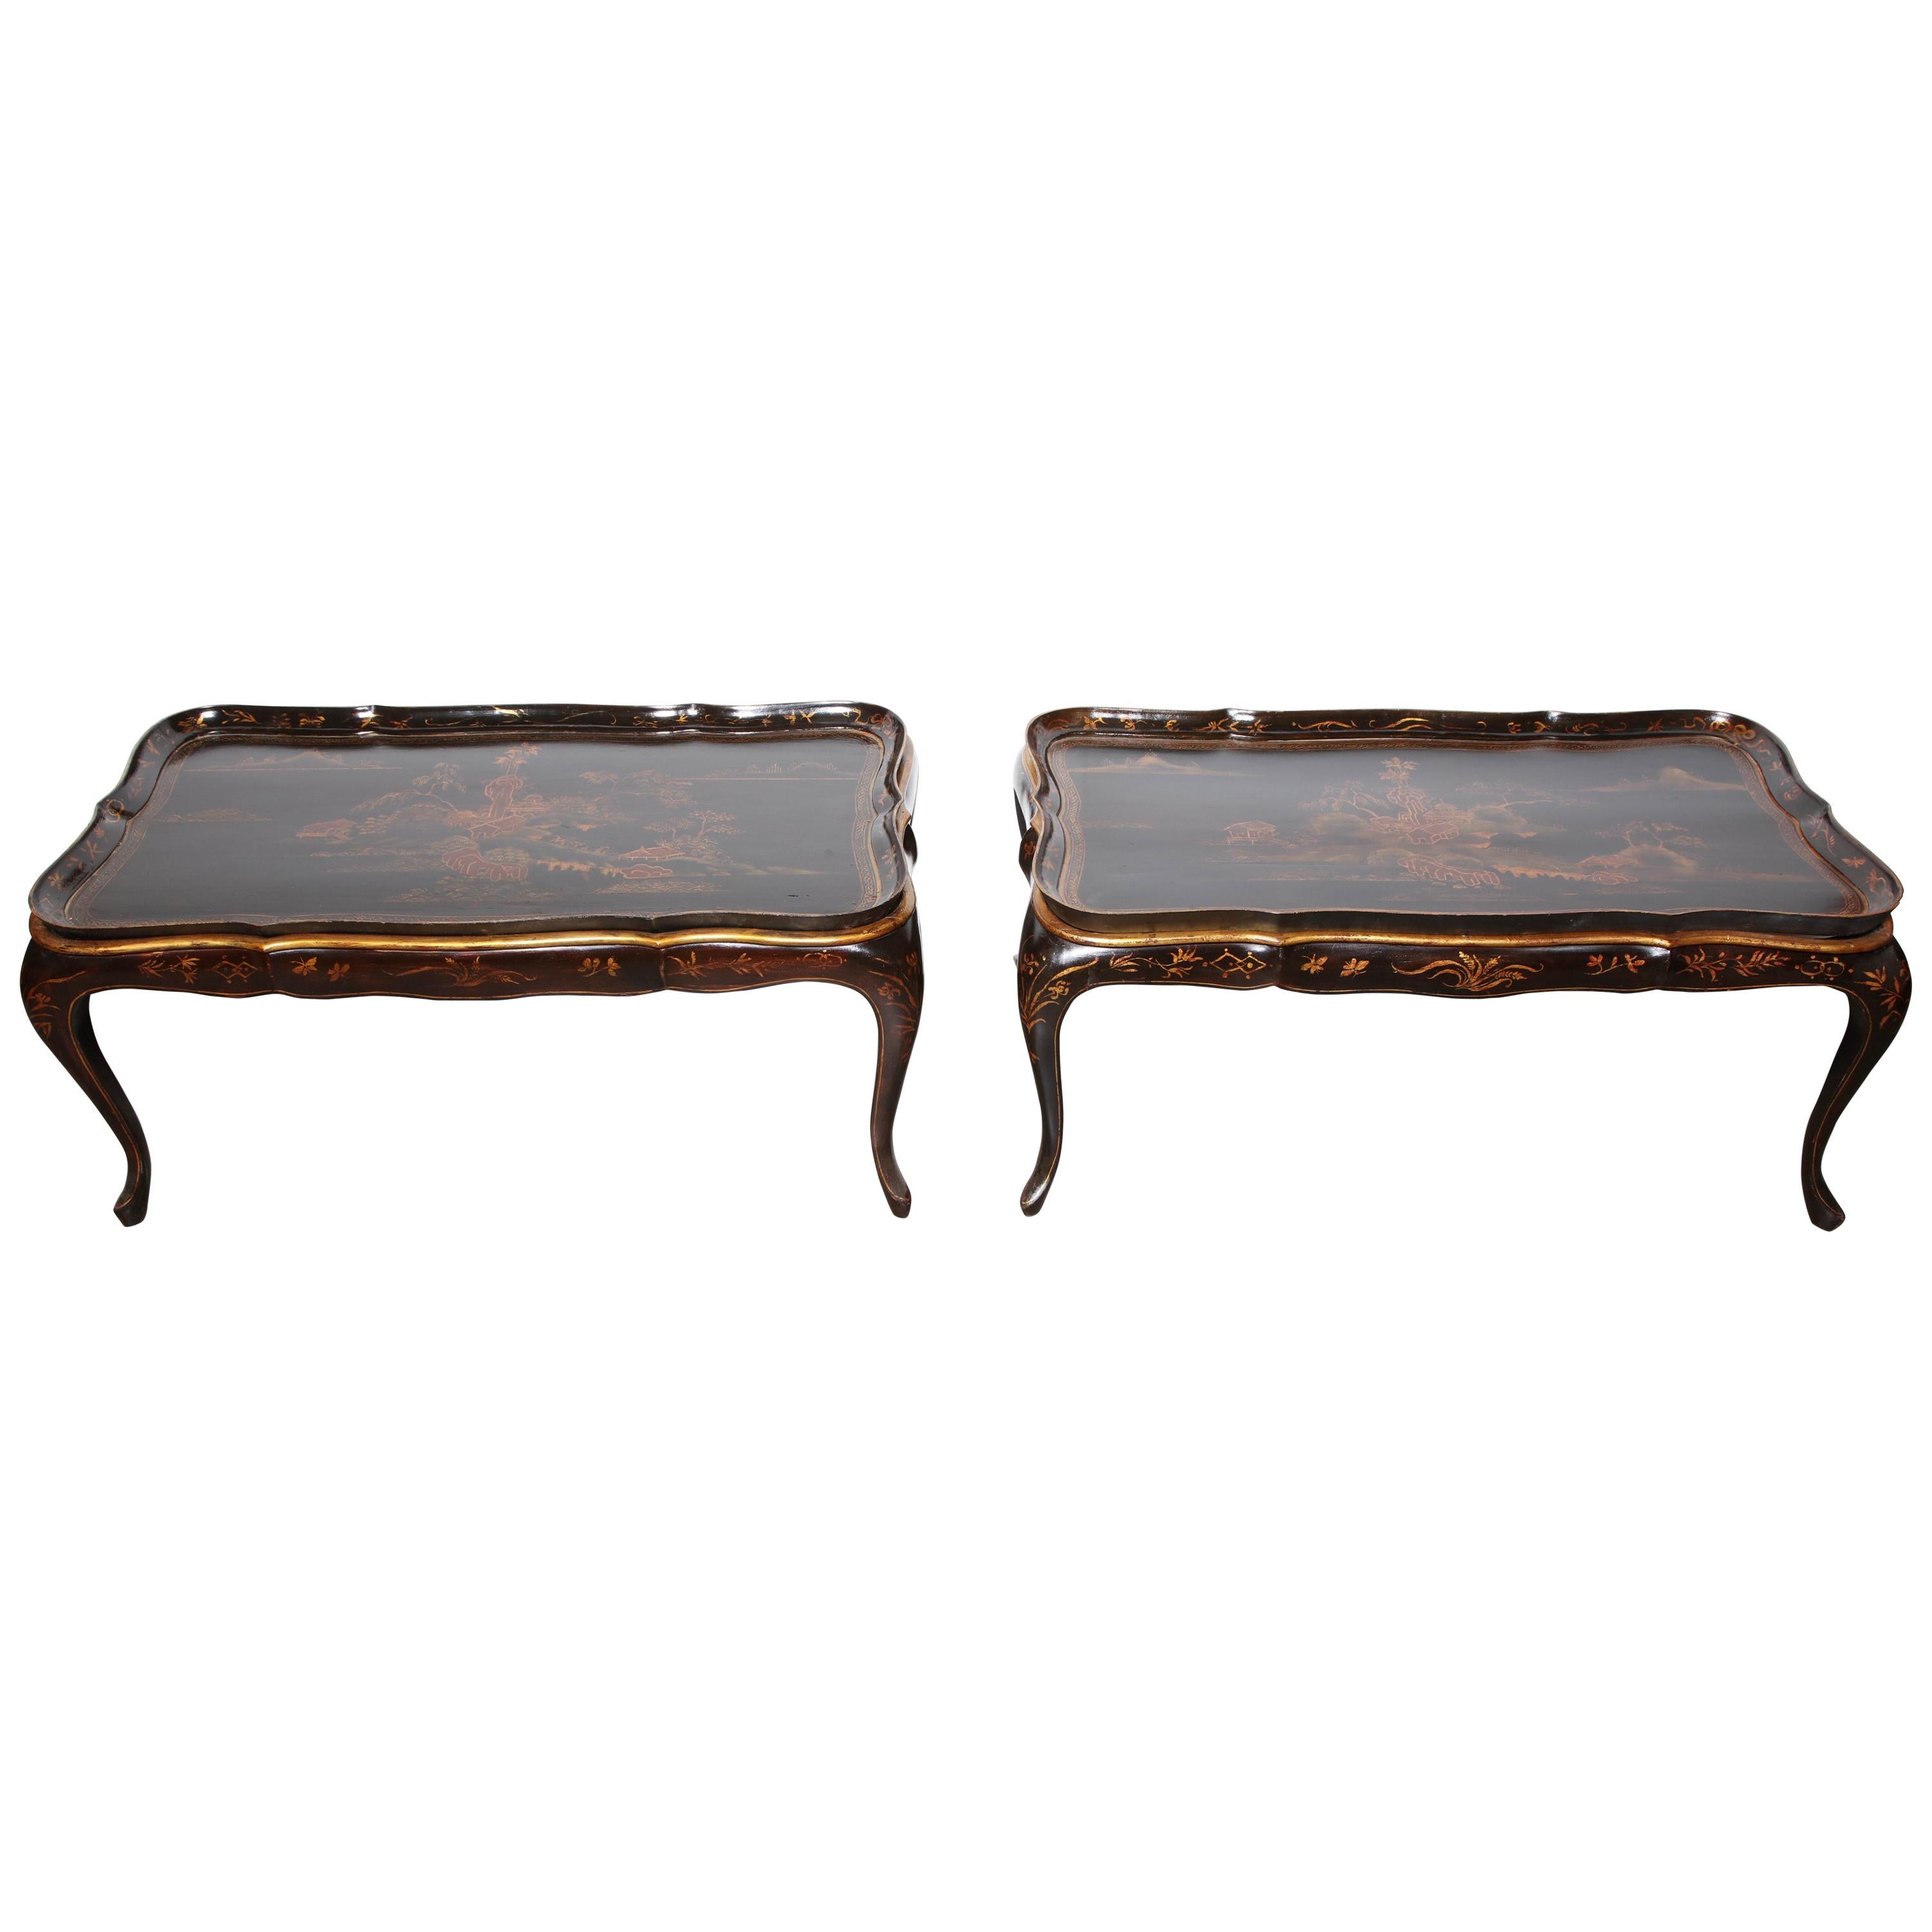 Two Chinese Lacquered Coffee Tables